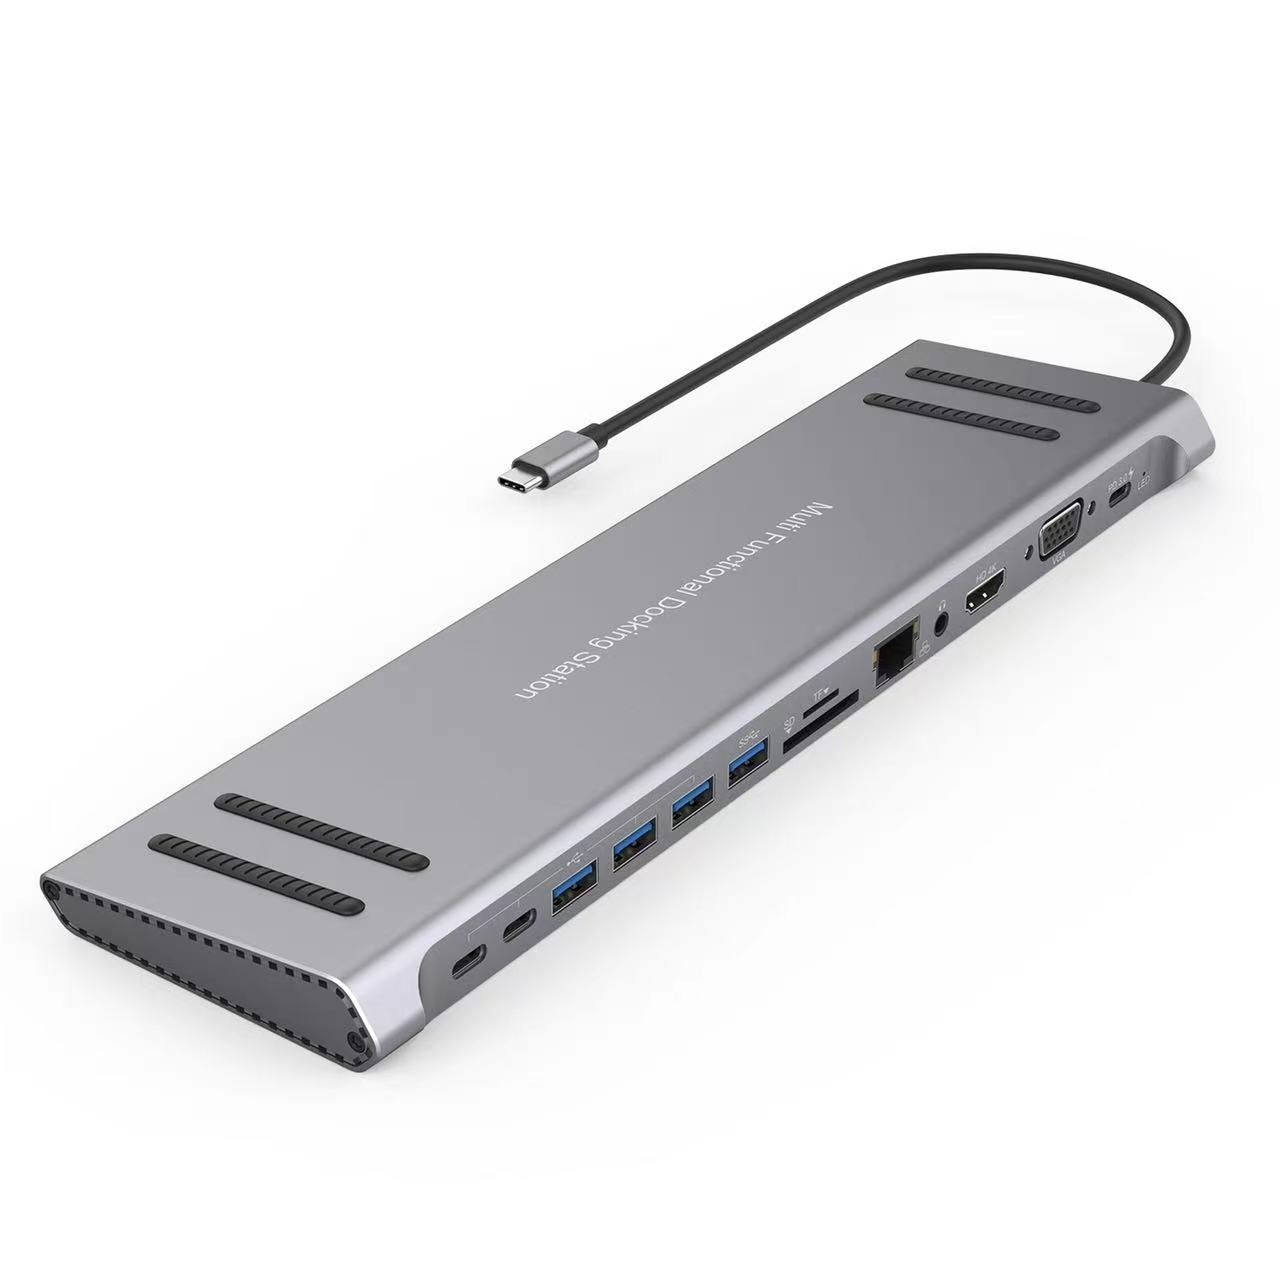 13 in 1 USB C Docking Station Network Hub with HDMI VGA PD 3.0 USB C 10/100M Gigabit Laptop Stand for MacBook iPad Surface pro